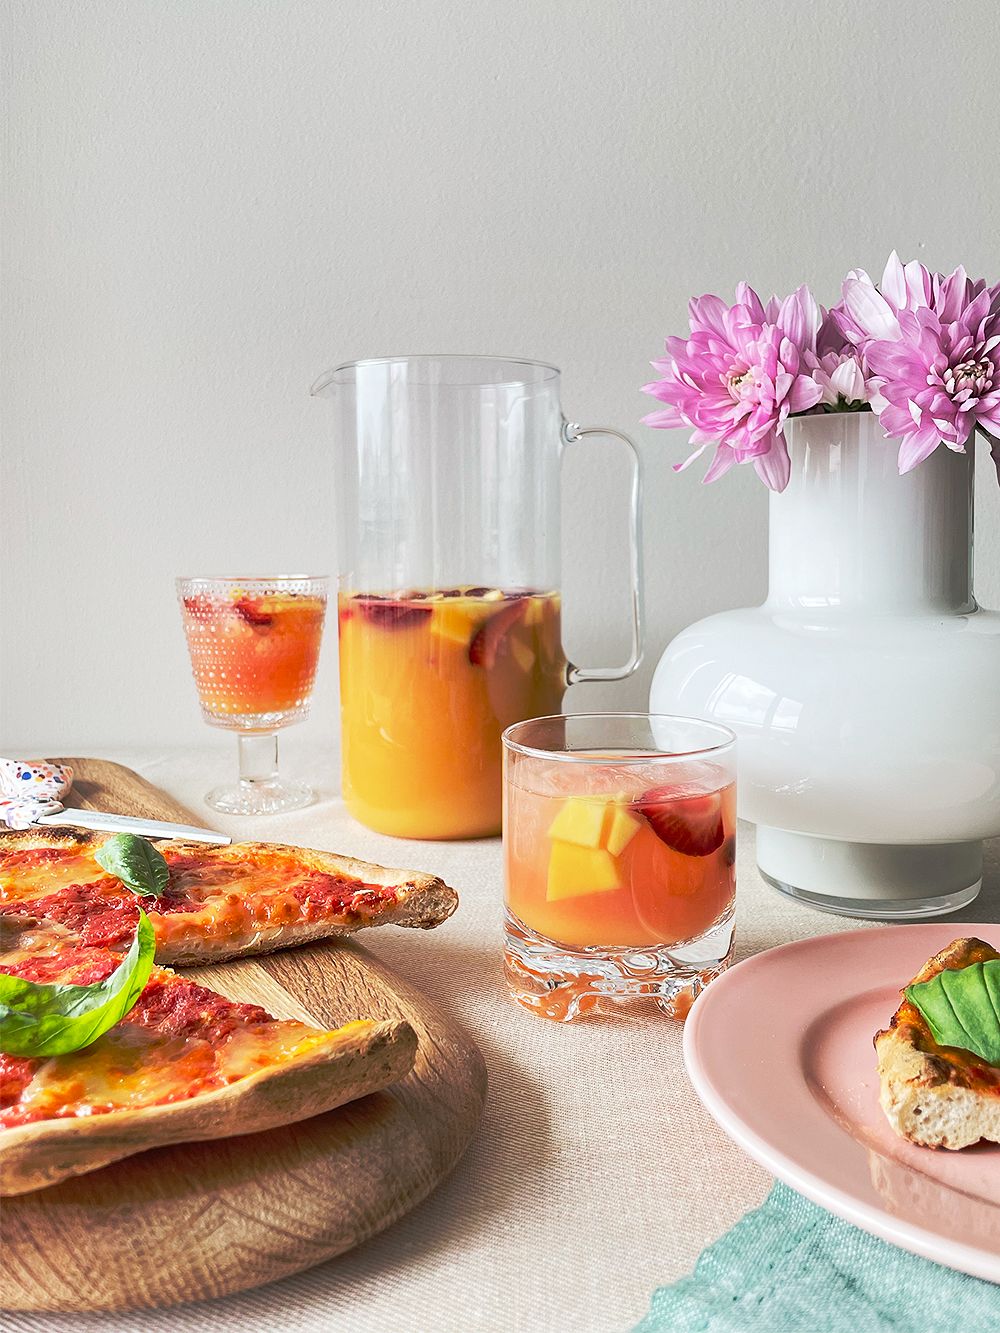 An image of Iittala's Kastehelmi glass, Woody chopping board and HAY's Rainbow plate in a table setting.